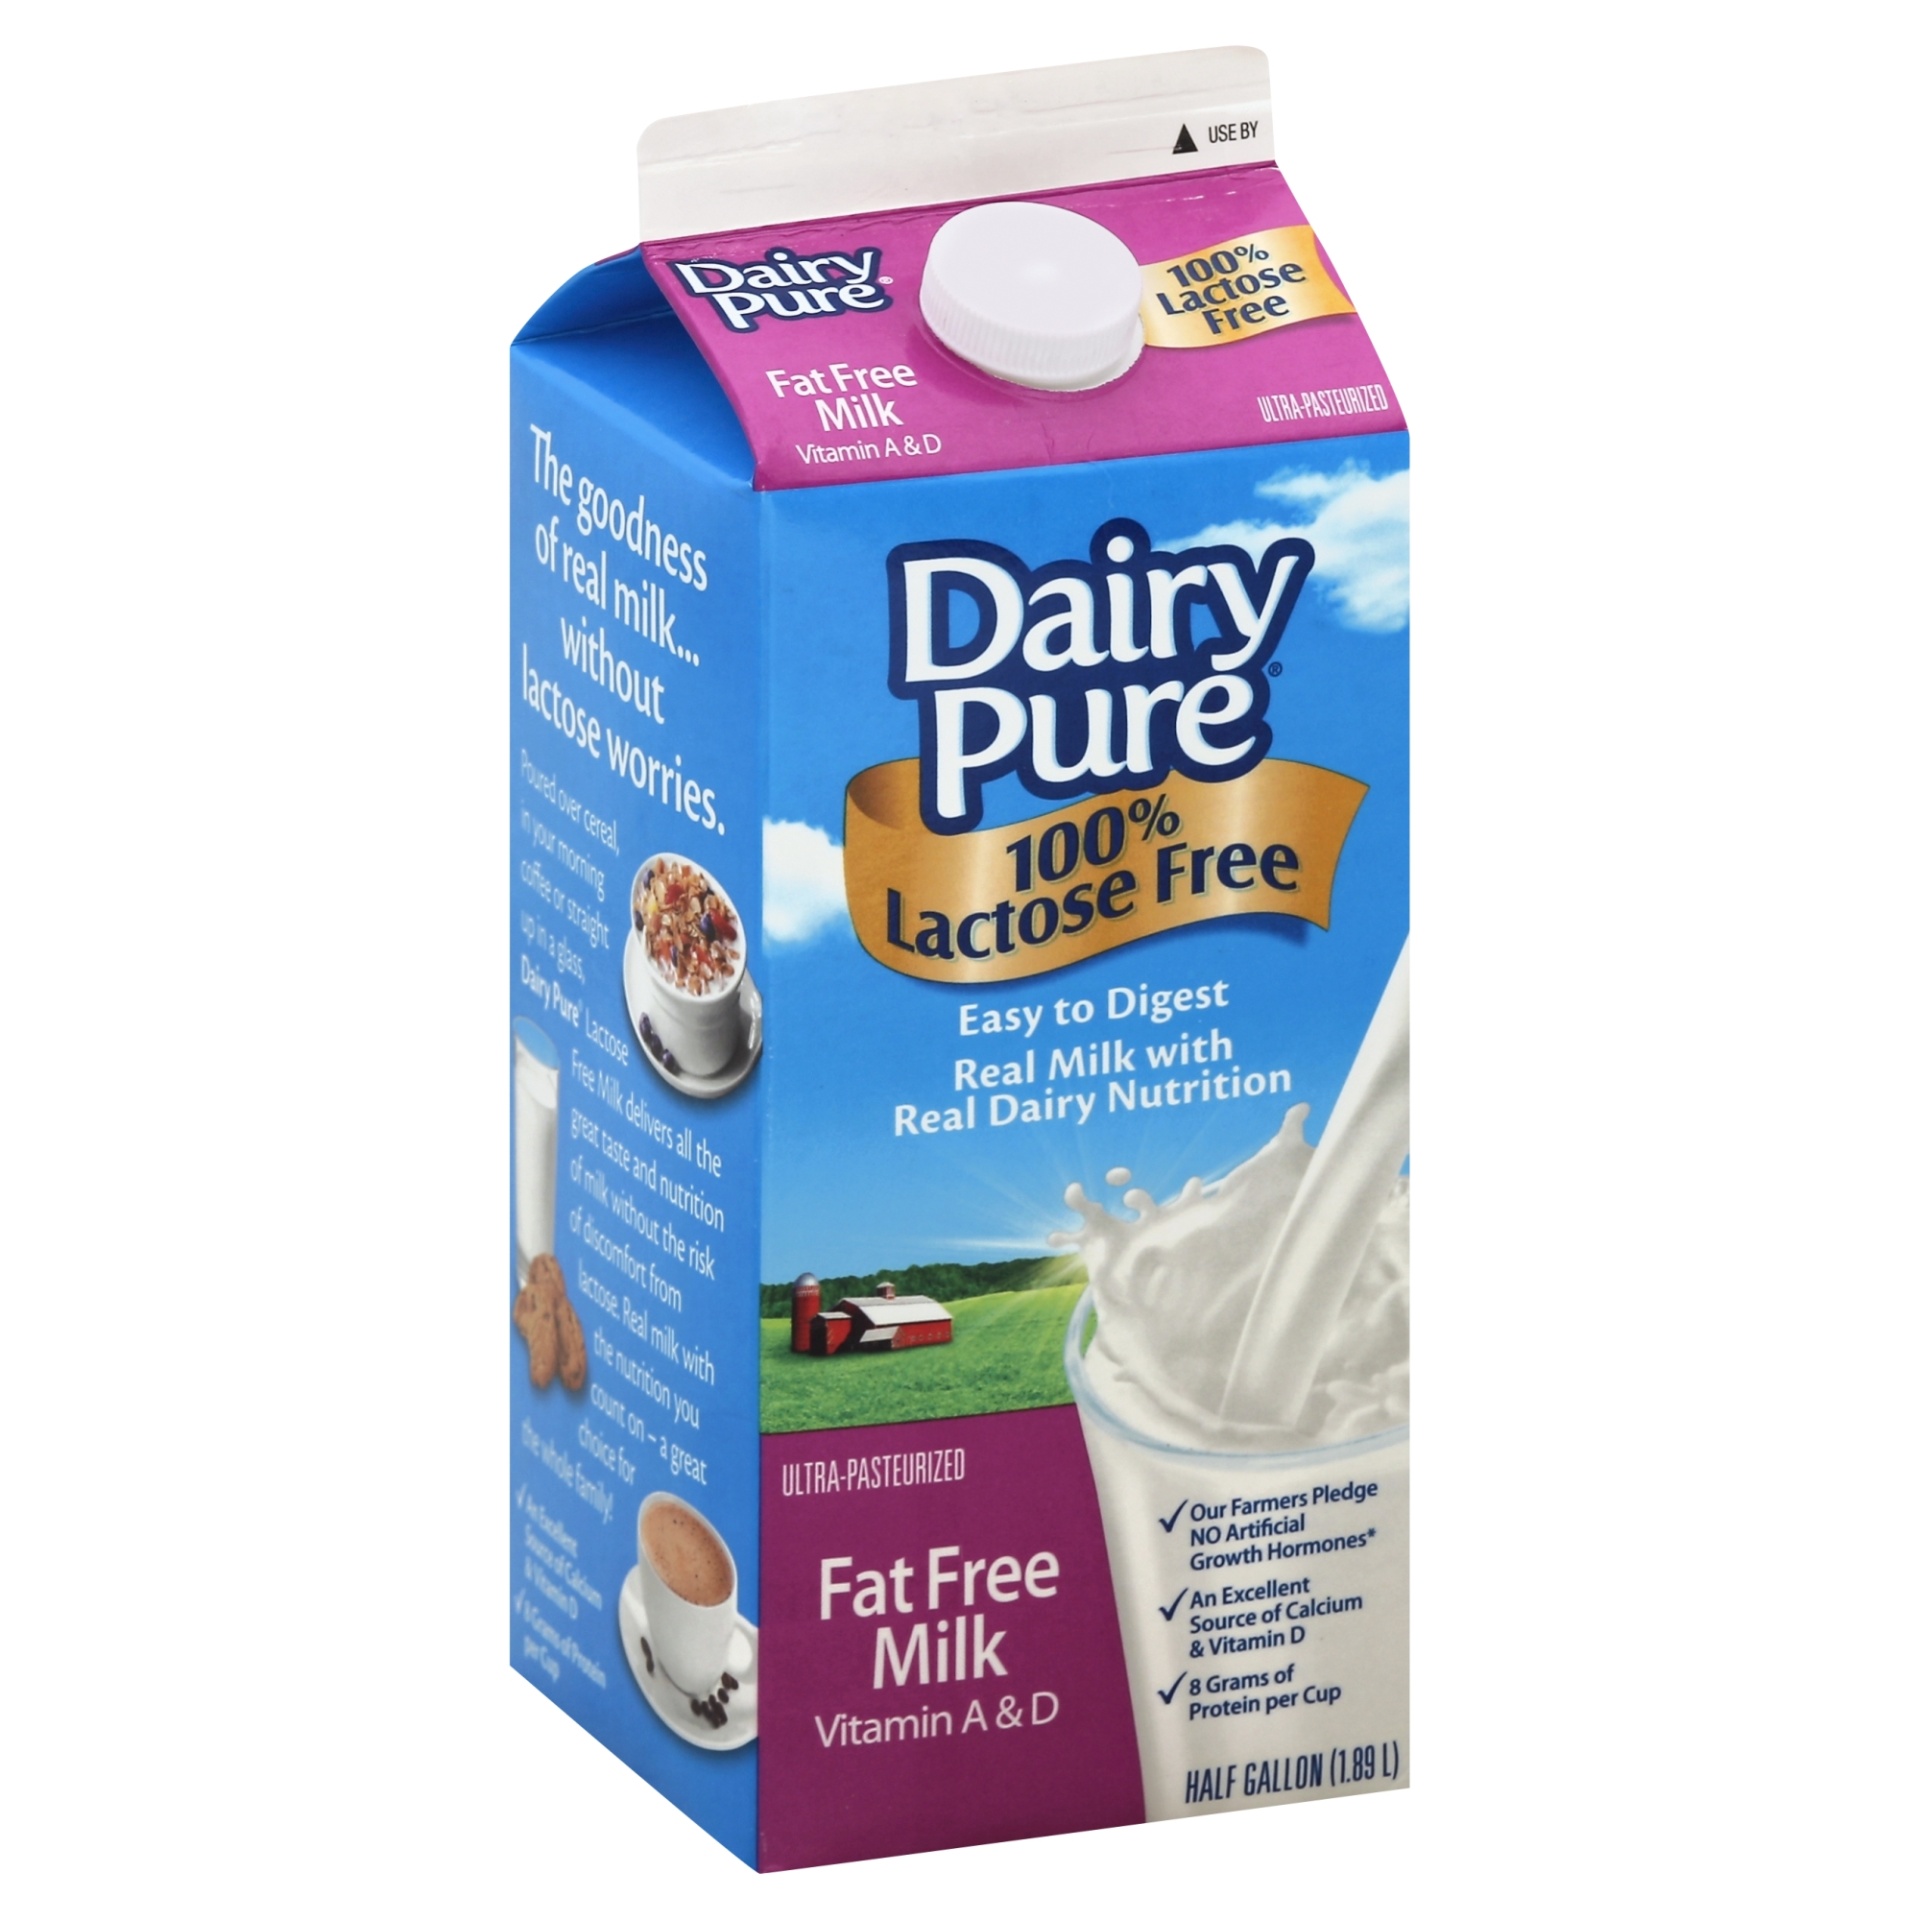 slide 1 of 1, Dairy Pure 100% Lactose Free Fat Free Milk Vitamin A & D, 1/2 gal